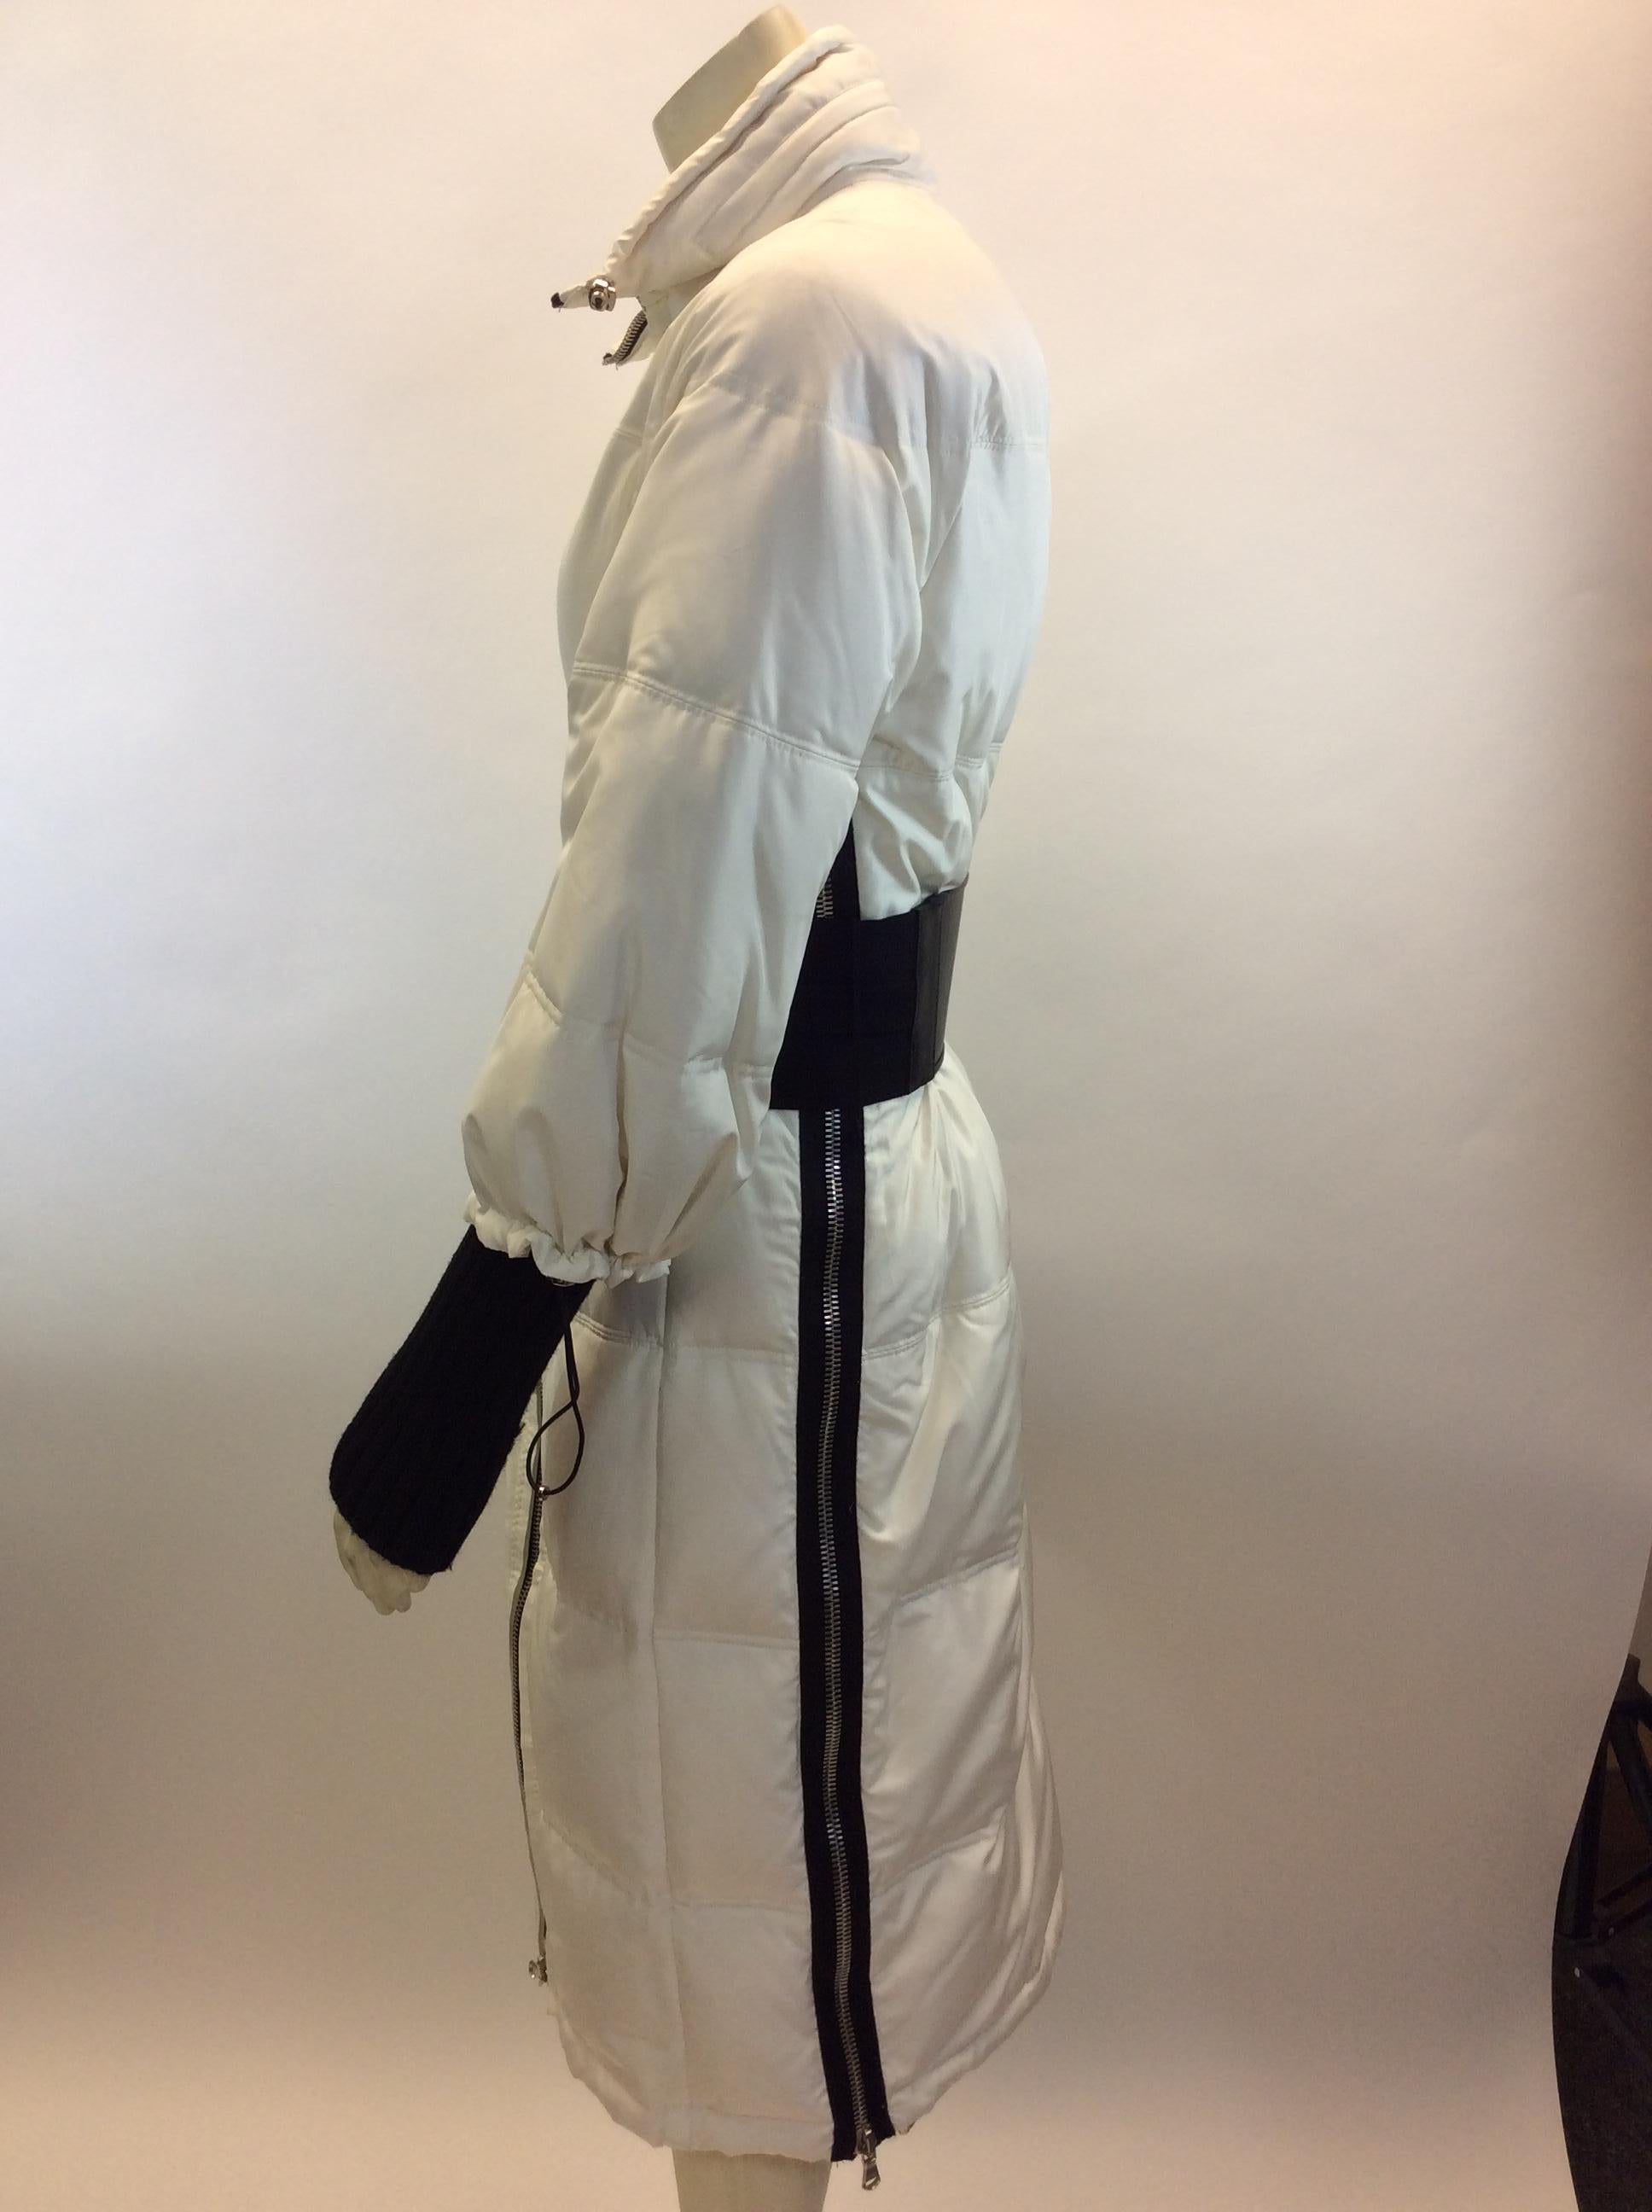 Kaufman Franco White Silk and Down Coat
$499
Made in China
Shell- 100% Silk
Filling- 100% Down
Lining- 100% Silk
Size 8
Length 40